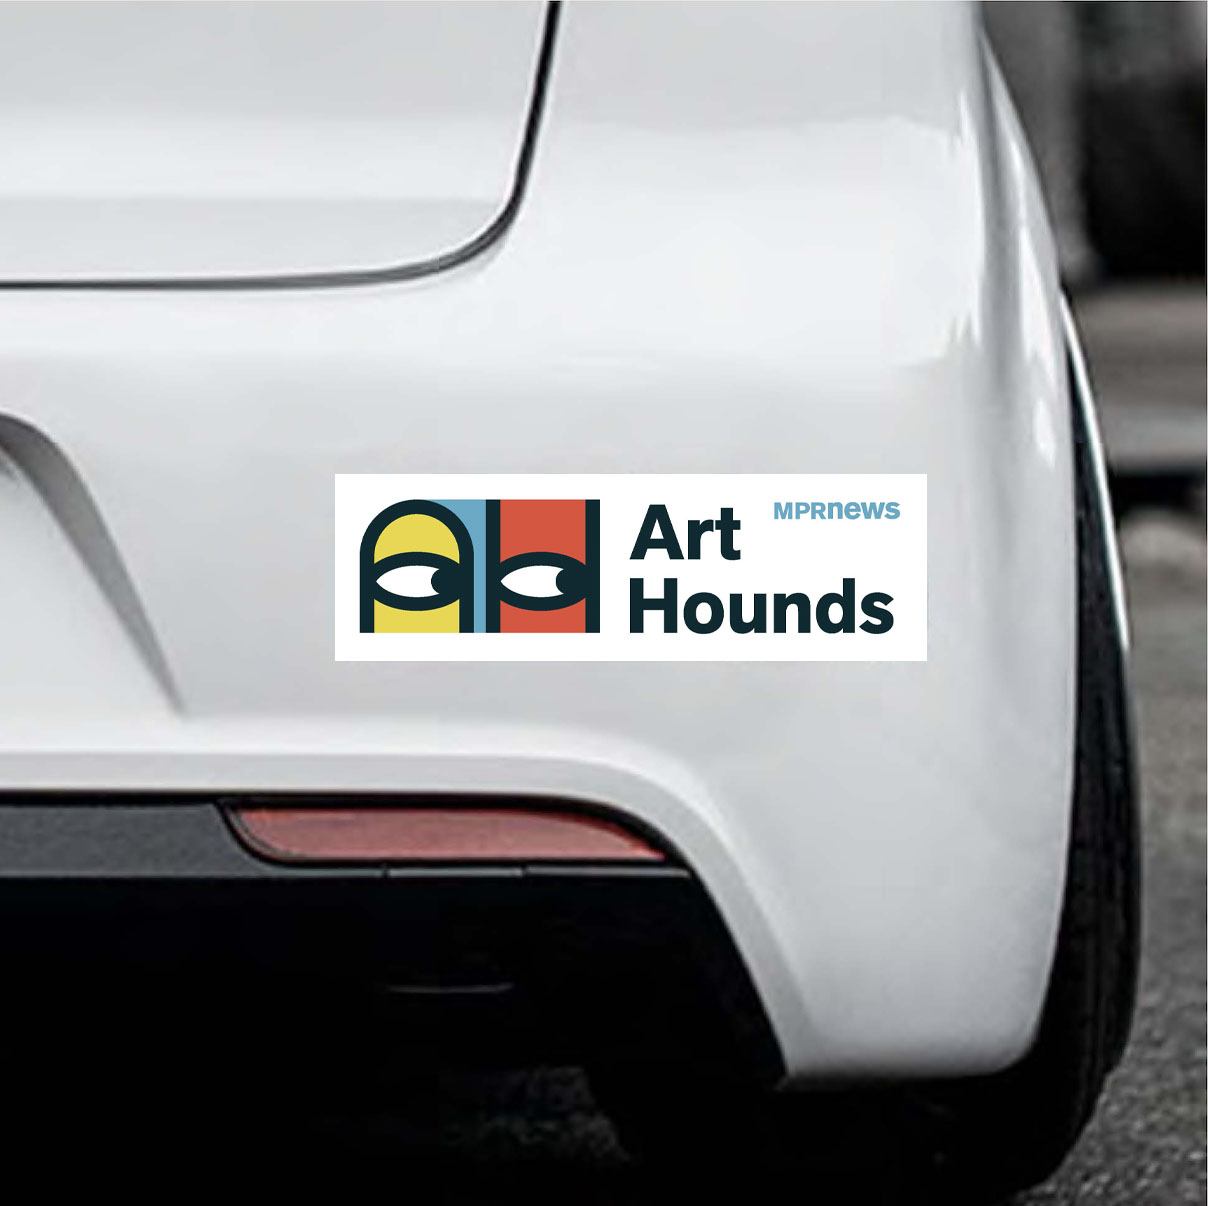 A colorful bumper sticker with the logo for Art Hounds